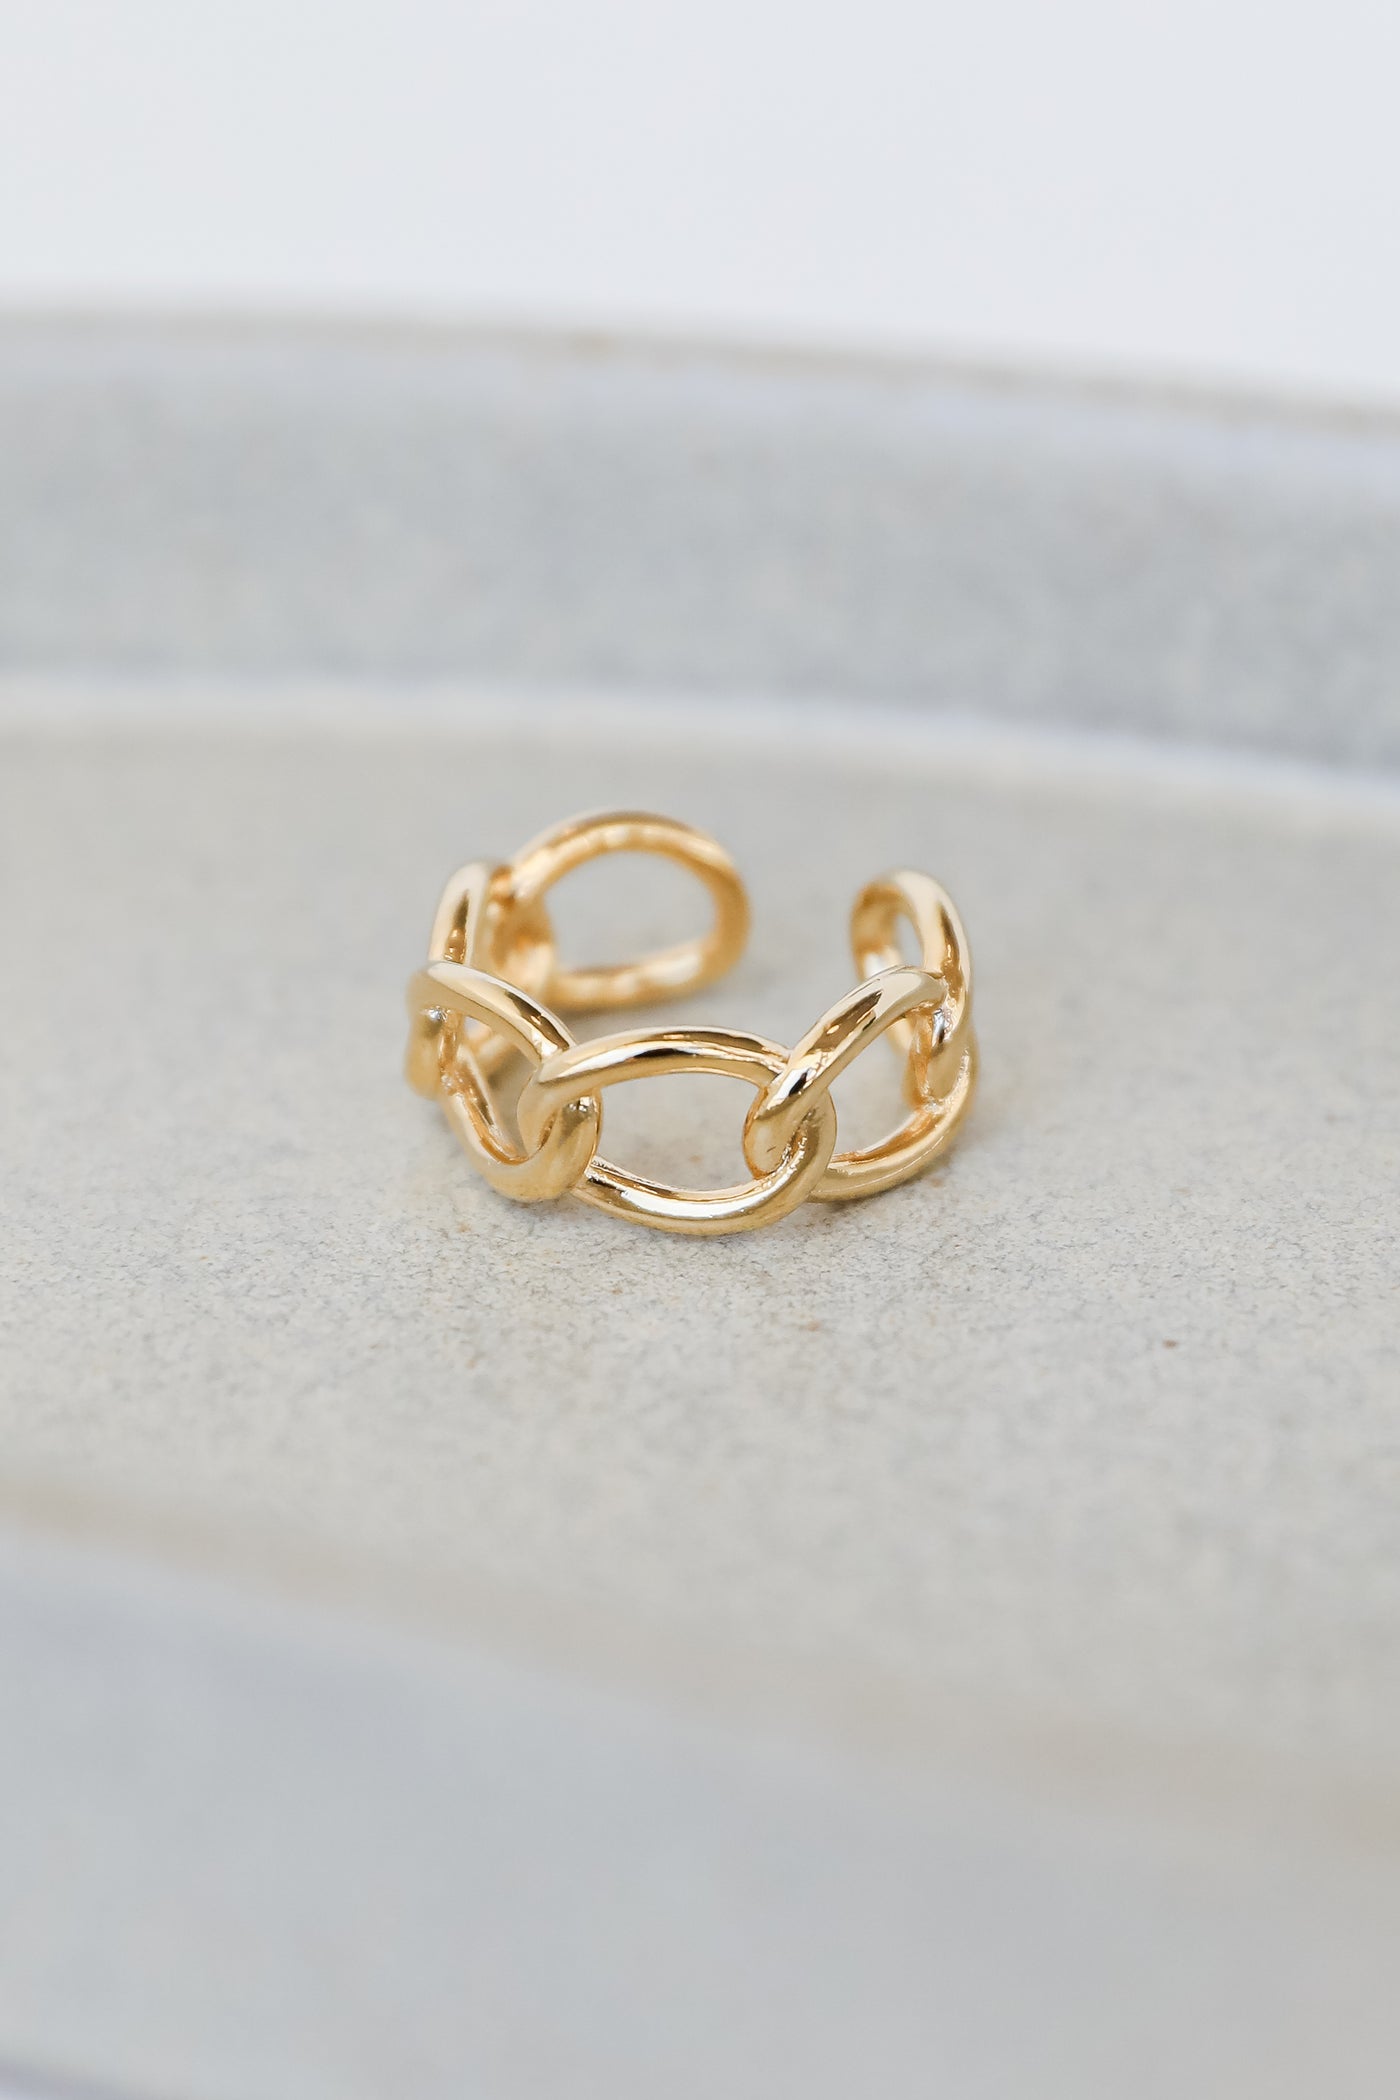 Gold Chainlink Ring flat lay